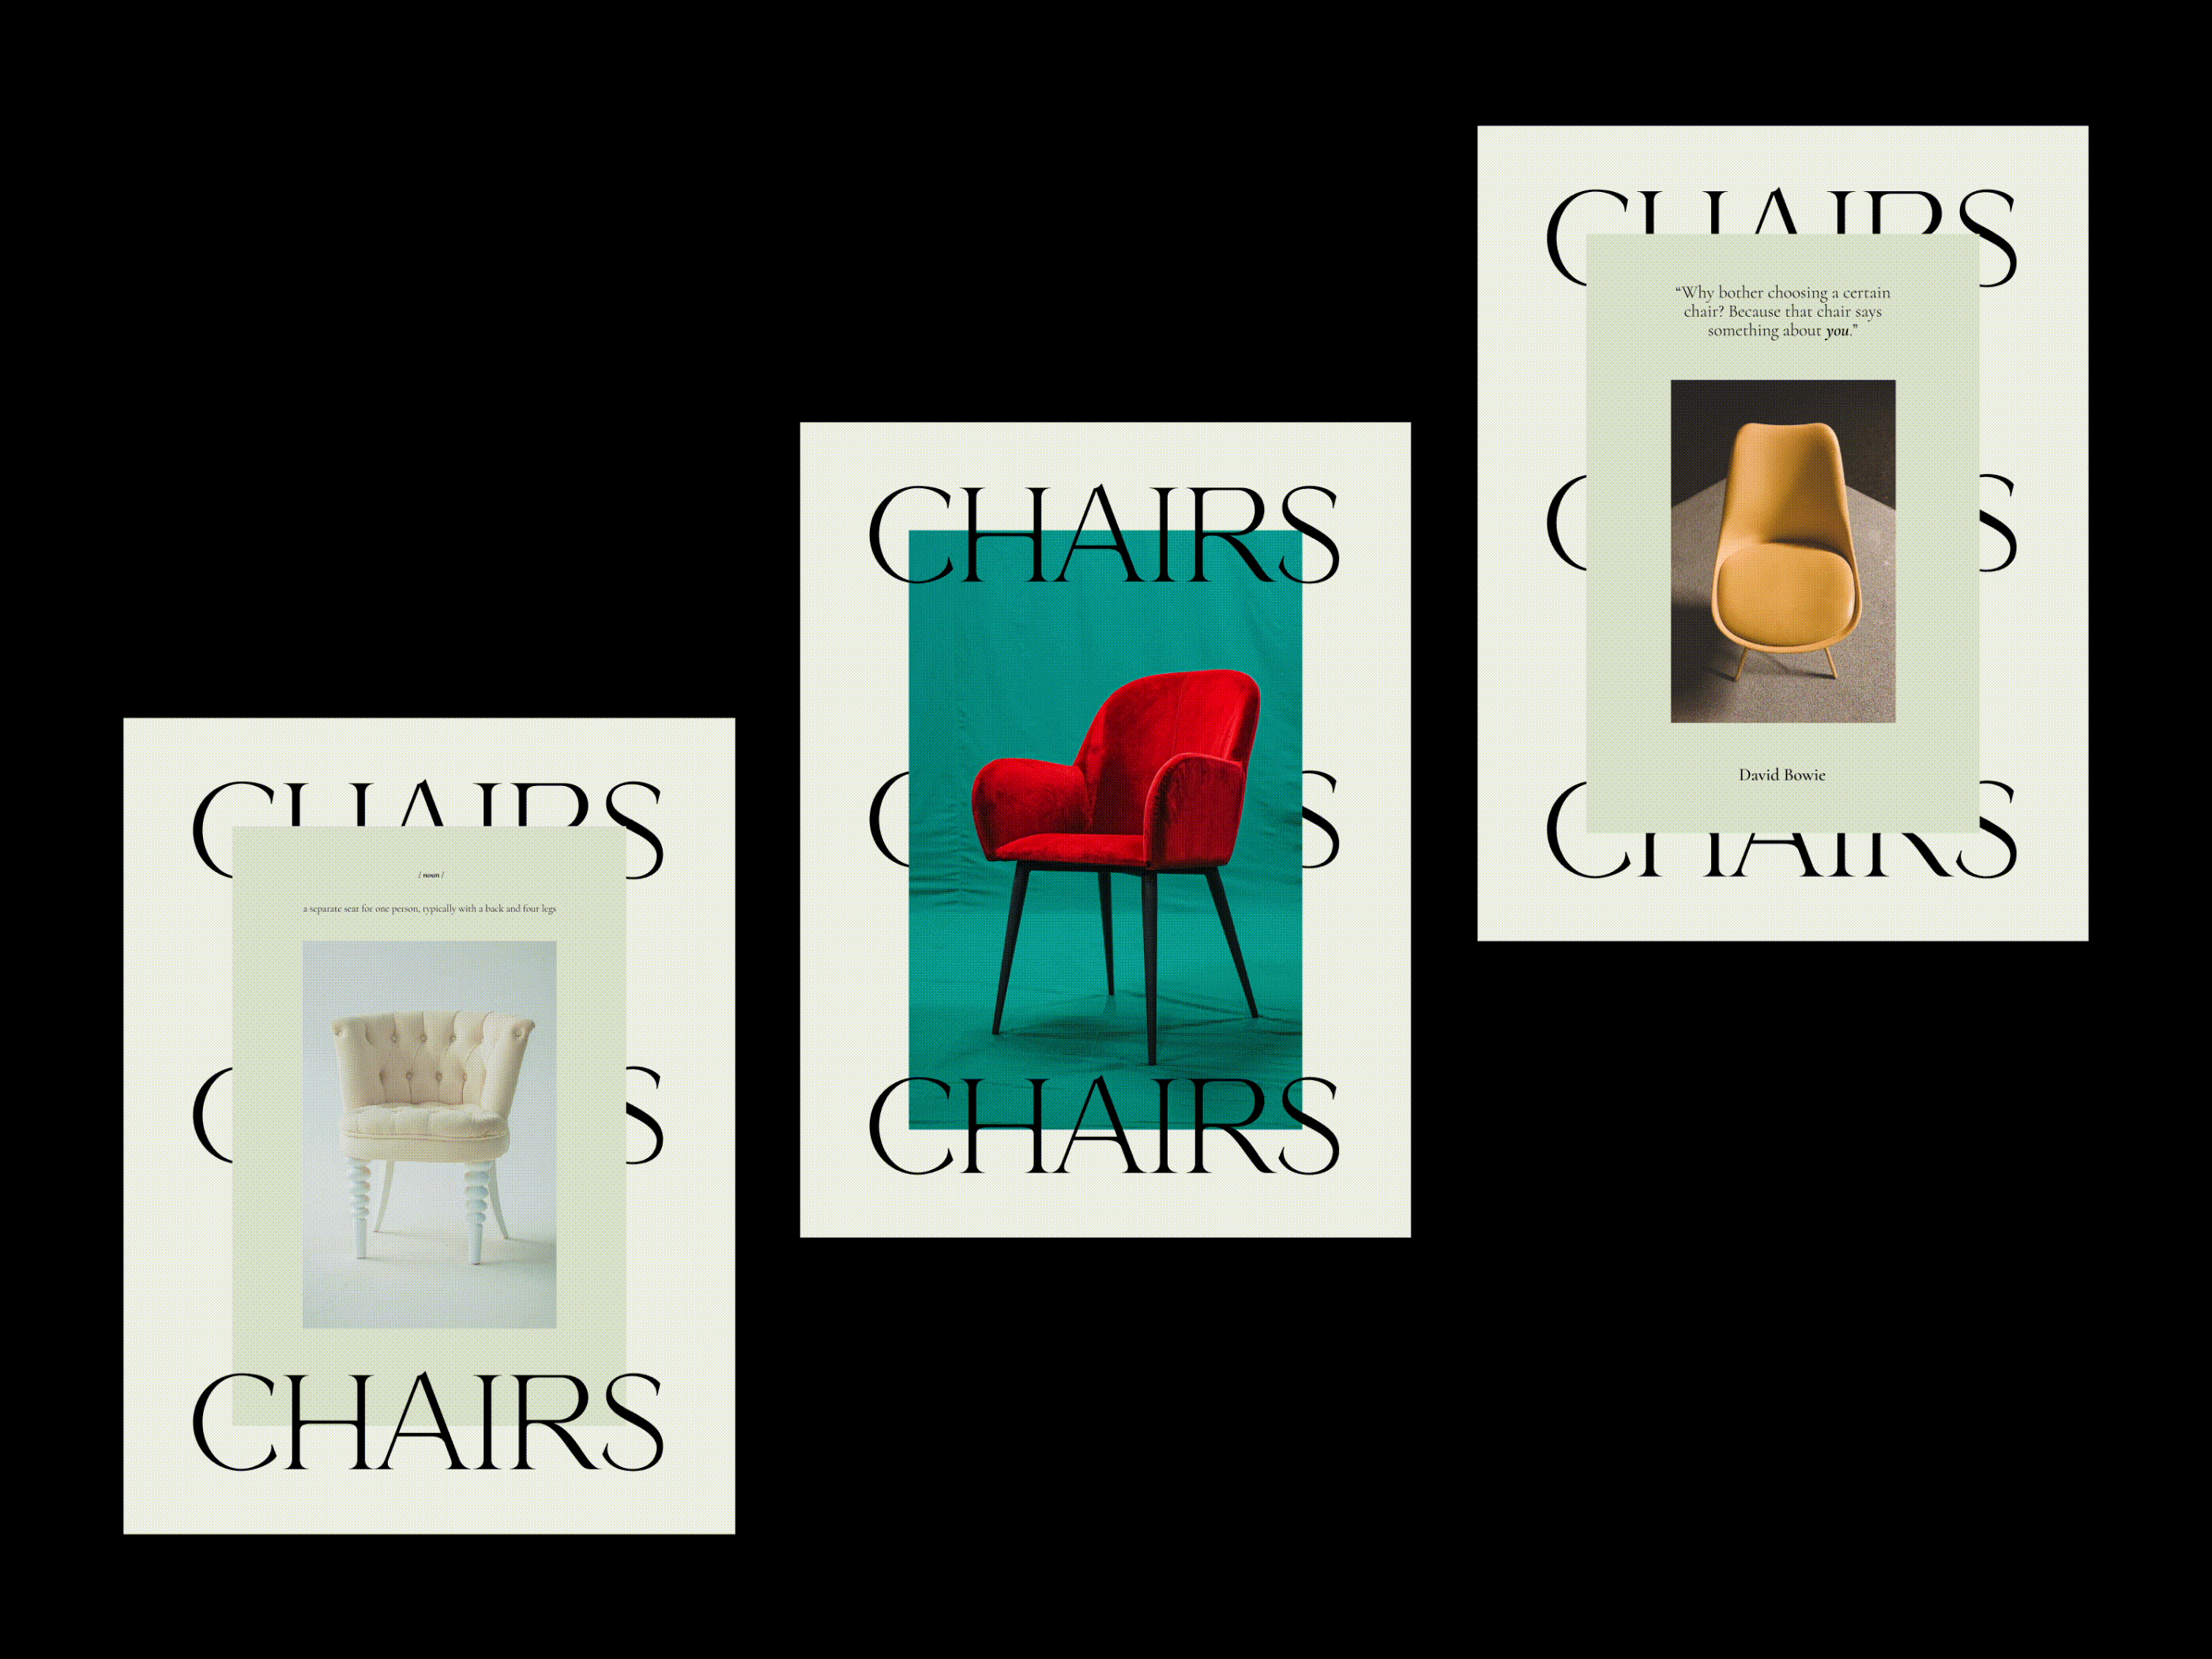 Chairs // An exploration catalogue chair chairs creative direction design editorial graphic design magazine layout minimal minimal design minimalist poster poster art poster design print typography